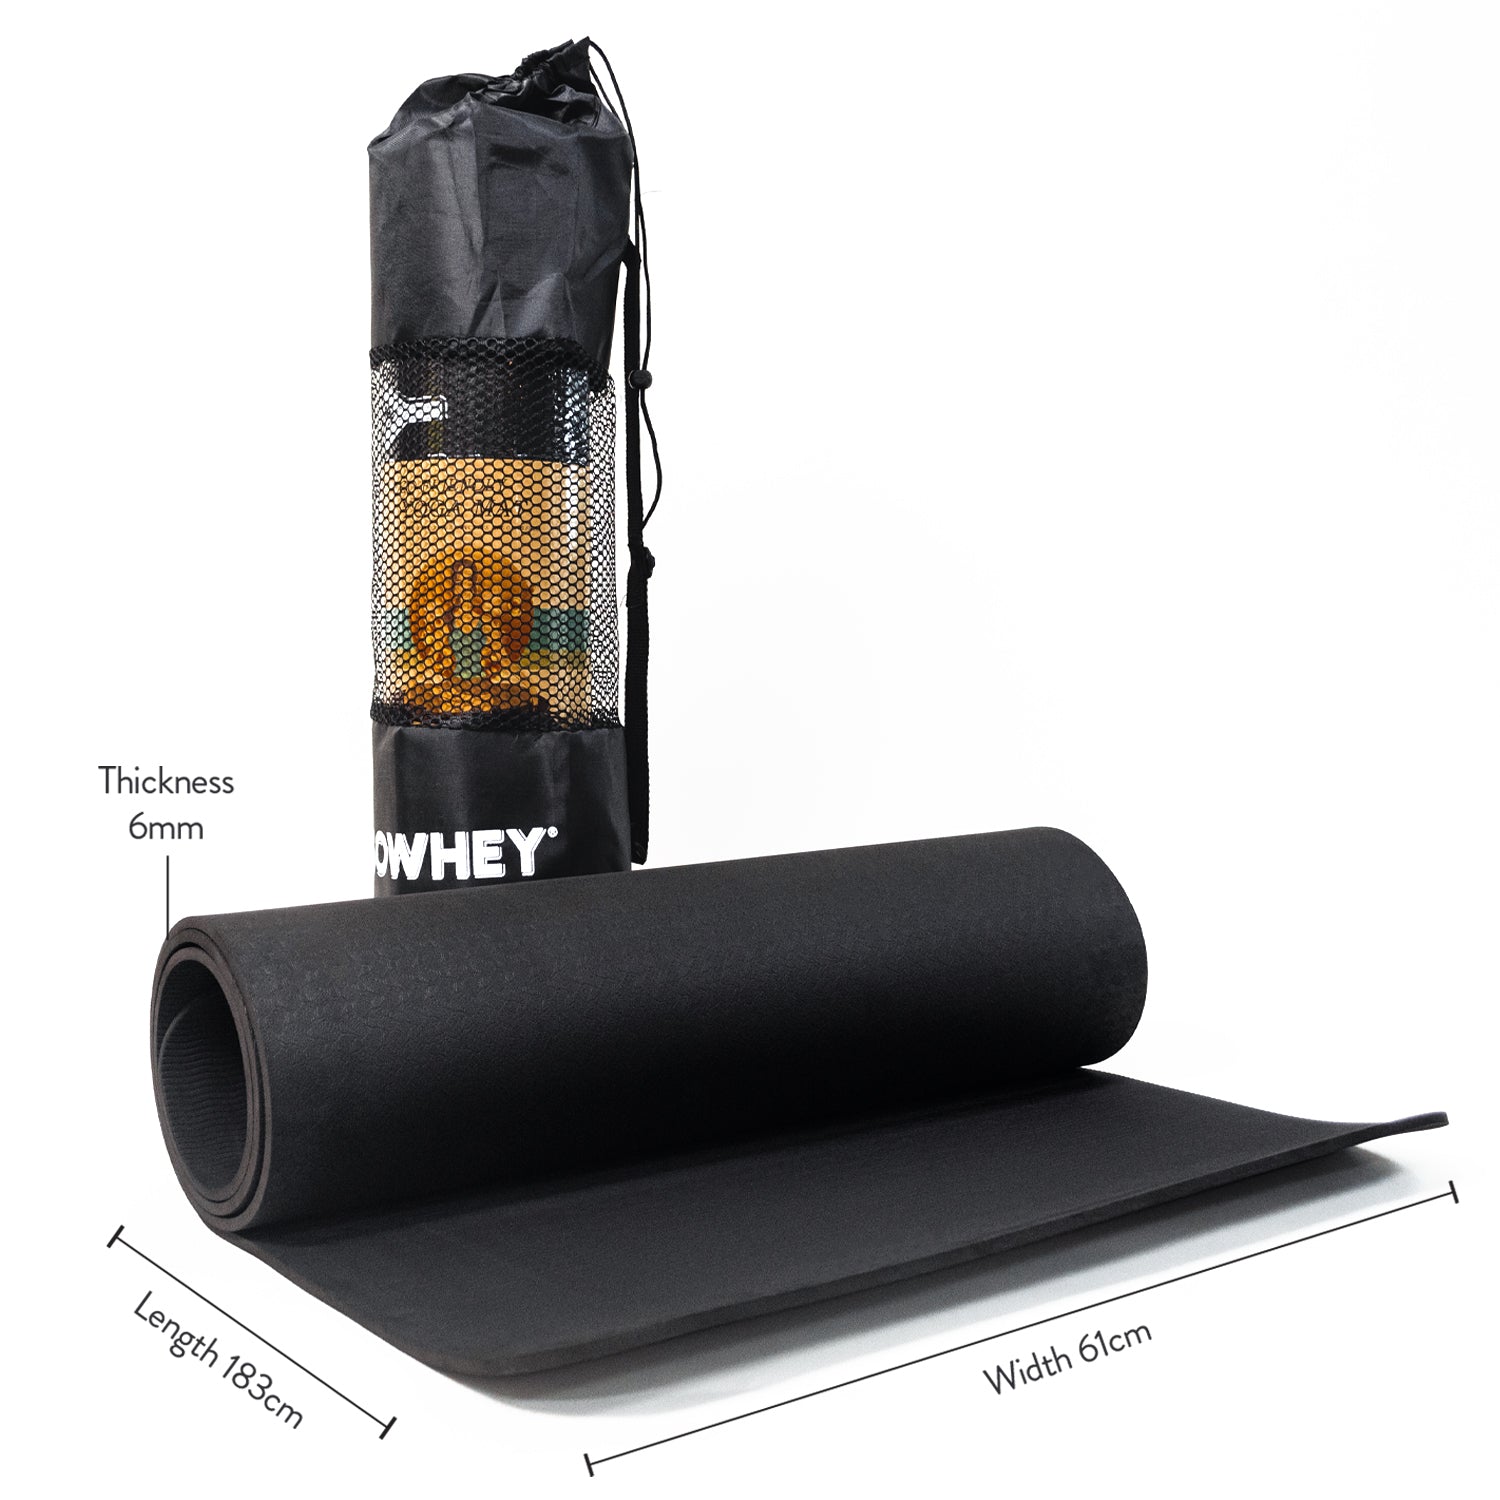 IsoWhey Yoga Mat dimensions and bag